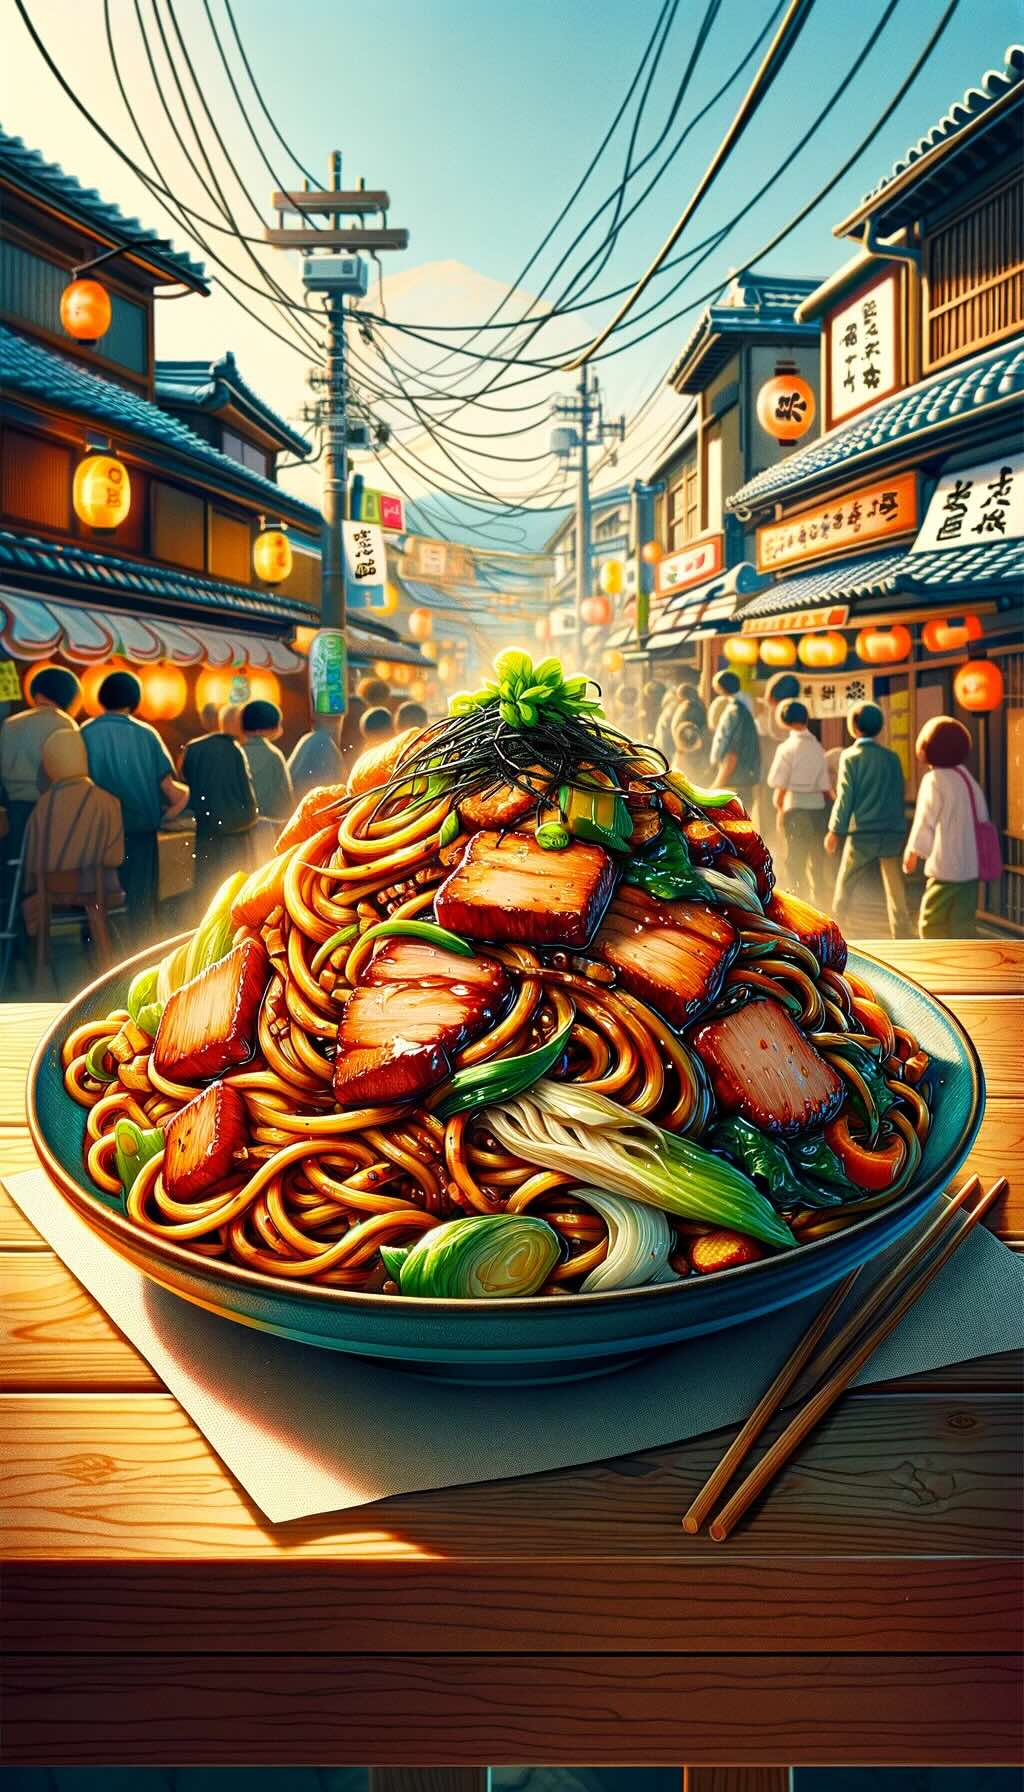 Iconic Fujinomiya Yakisoba, a culinary staple of Fujinomiya, Japan depicts the dish with its distinctive flavors and textures, set in a vibrant and lively setting